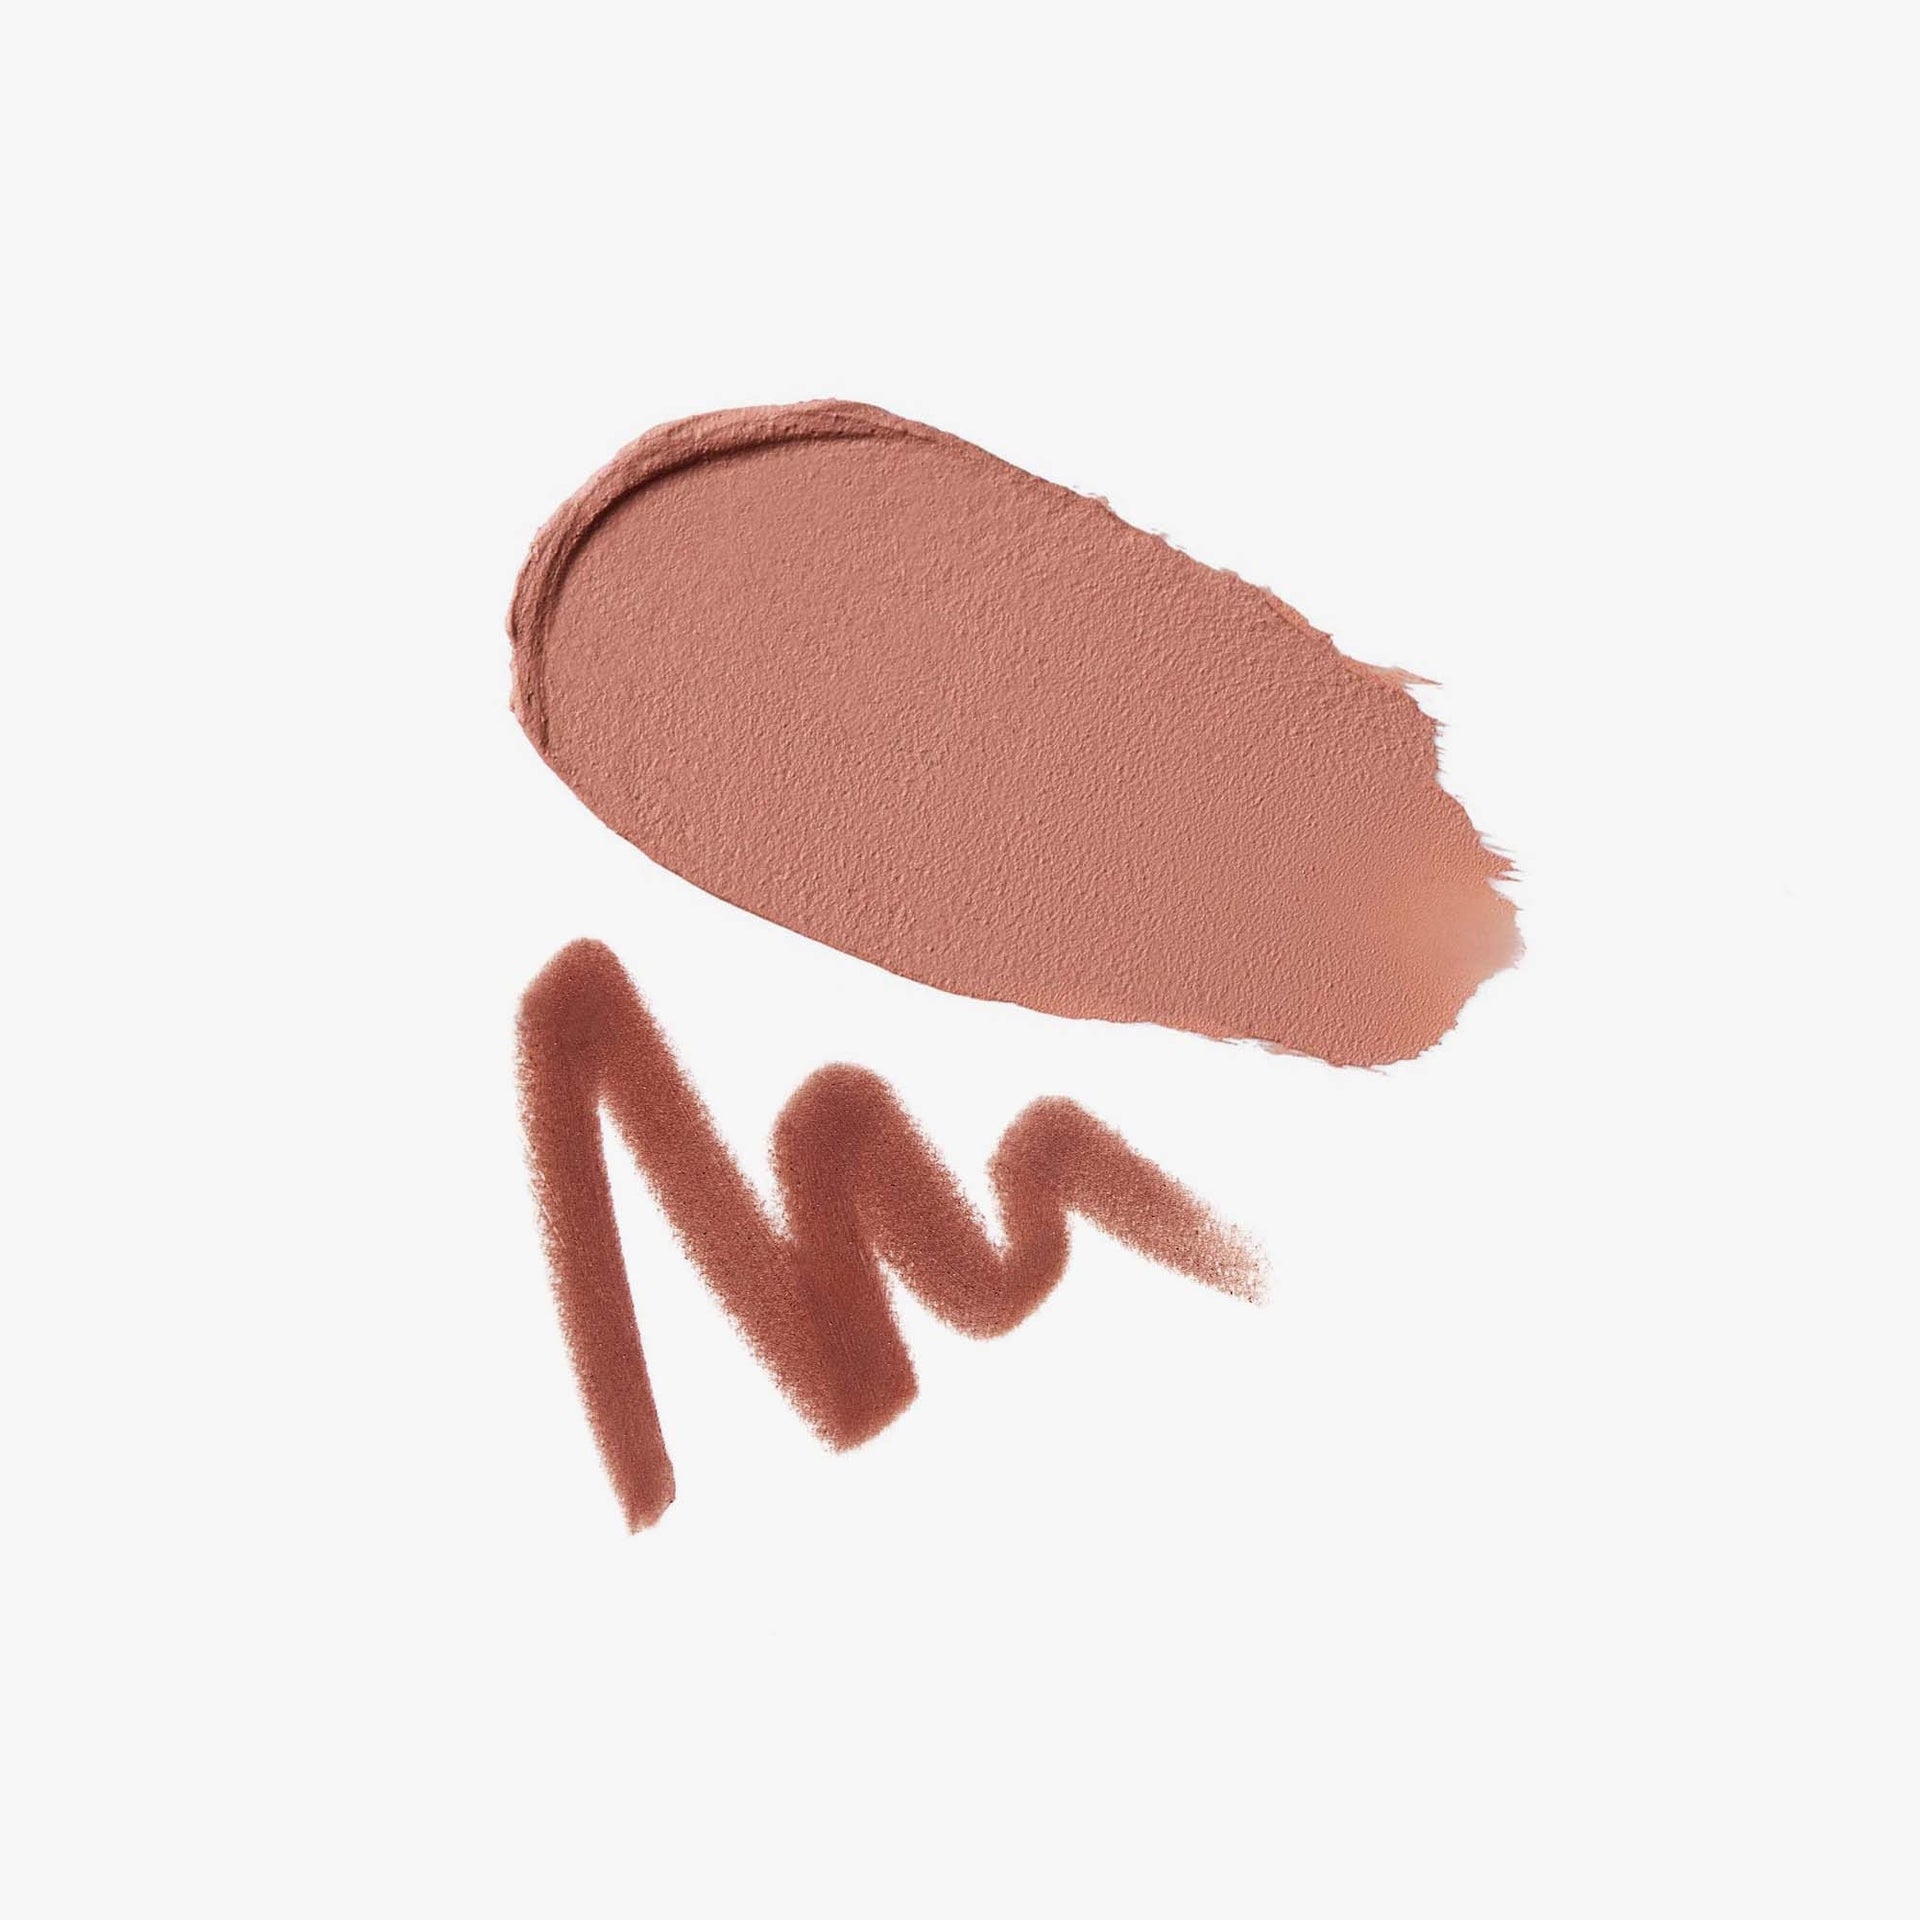 Peachy Nude |  Peachy Nude & Cool Brown Liner - Swatch 